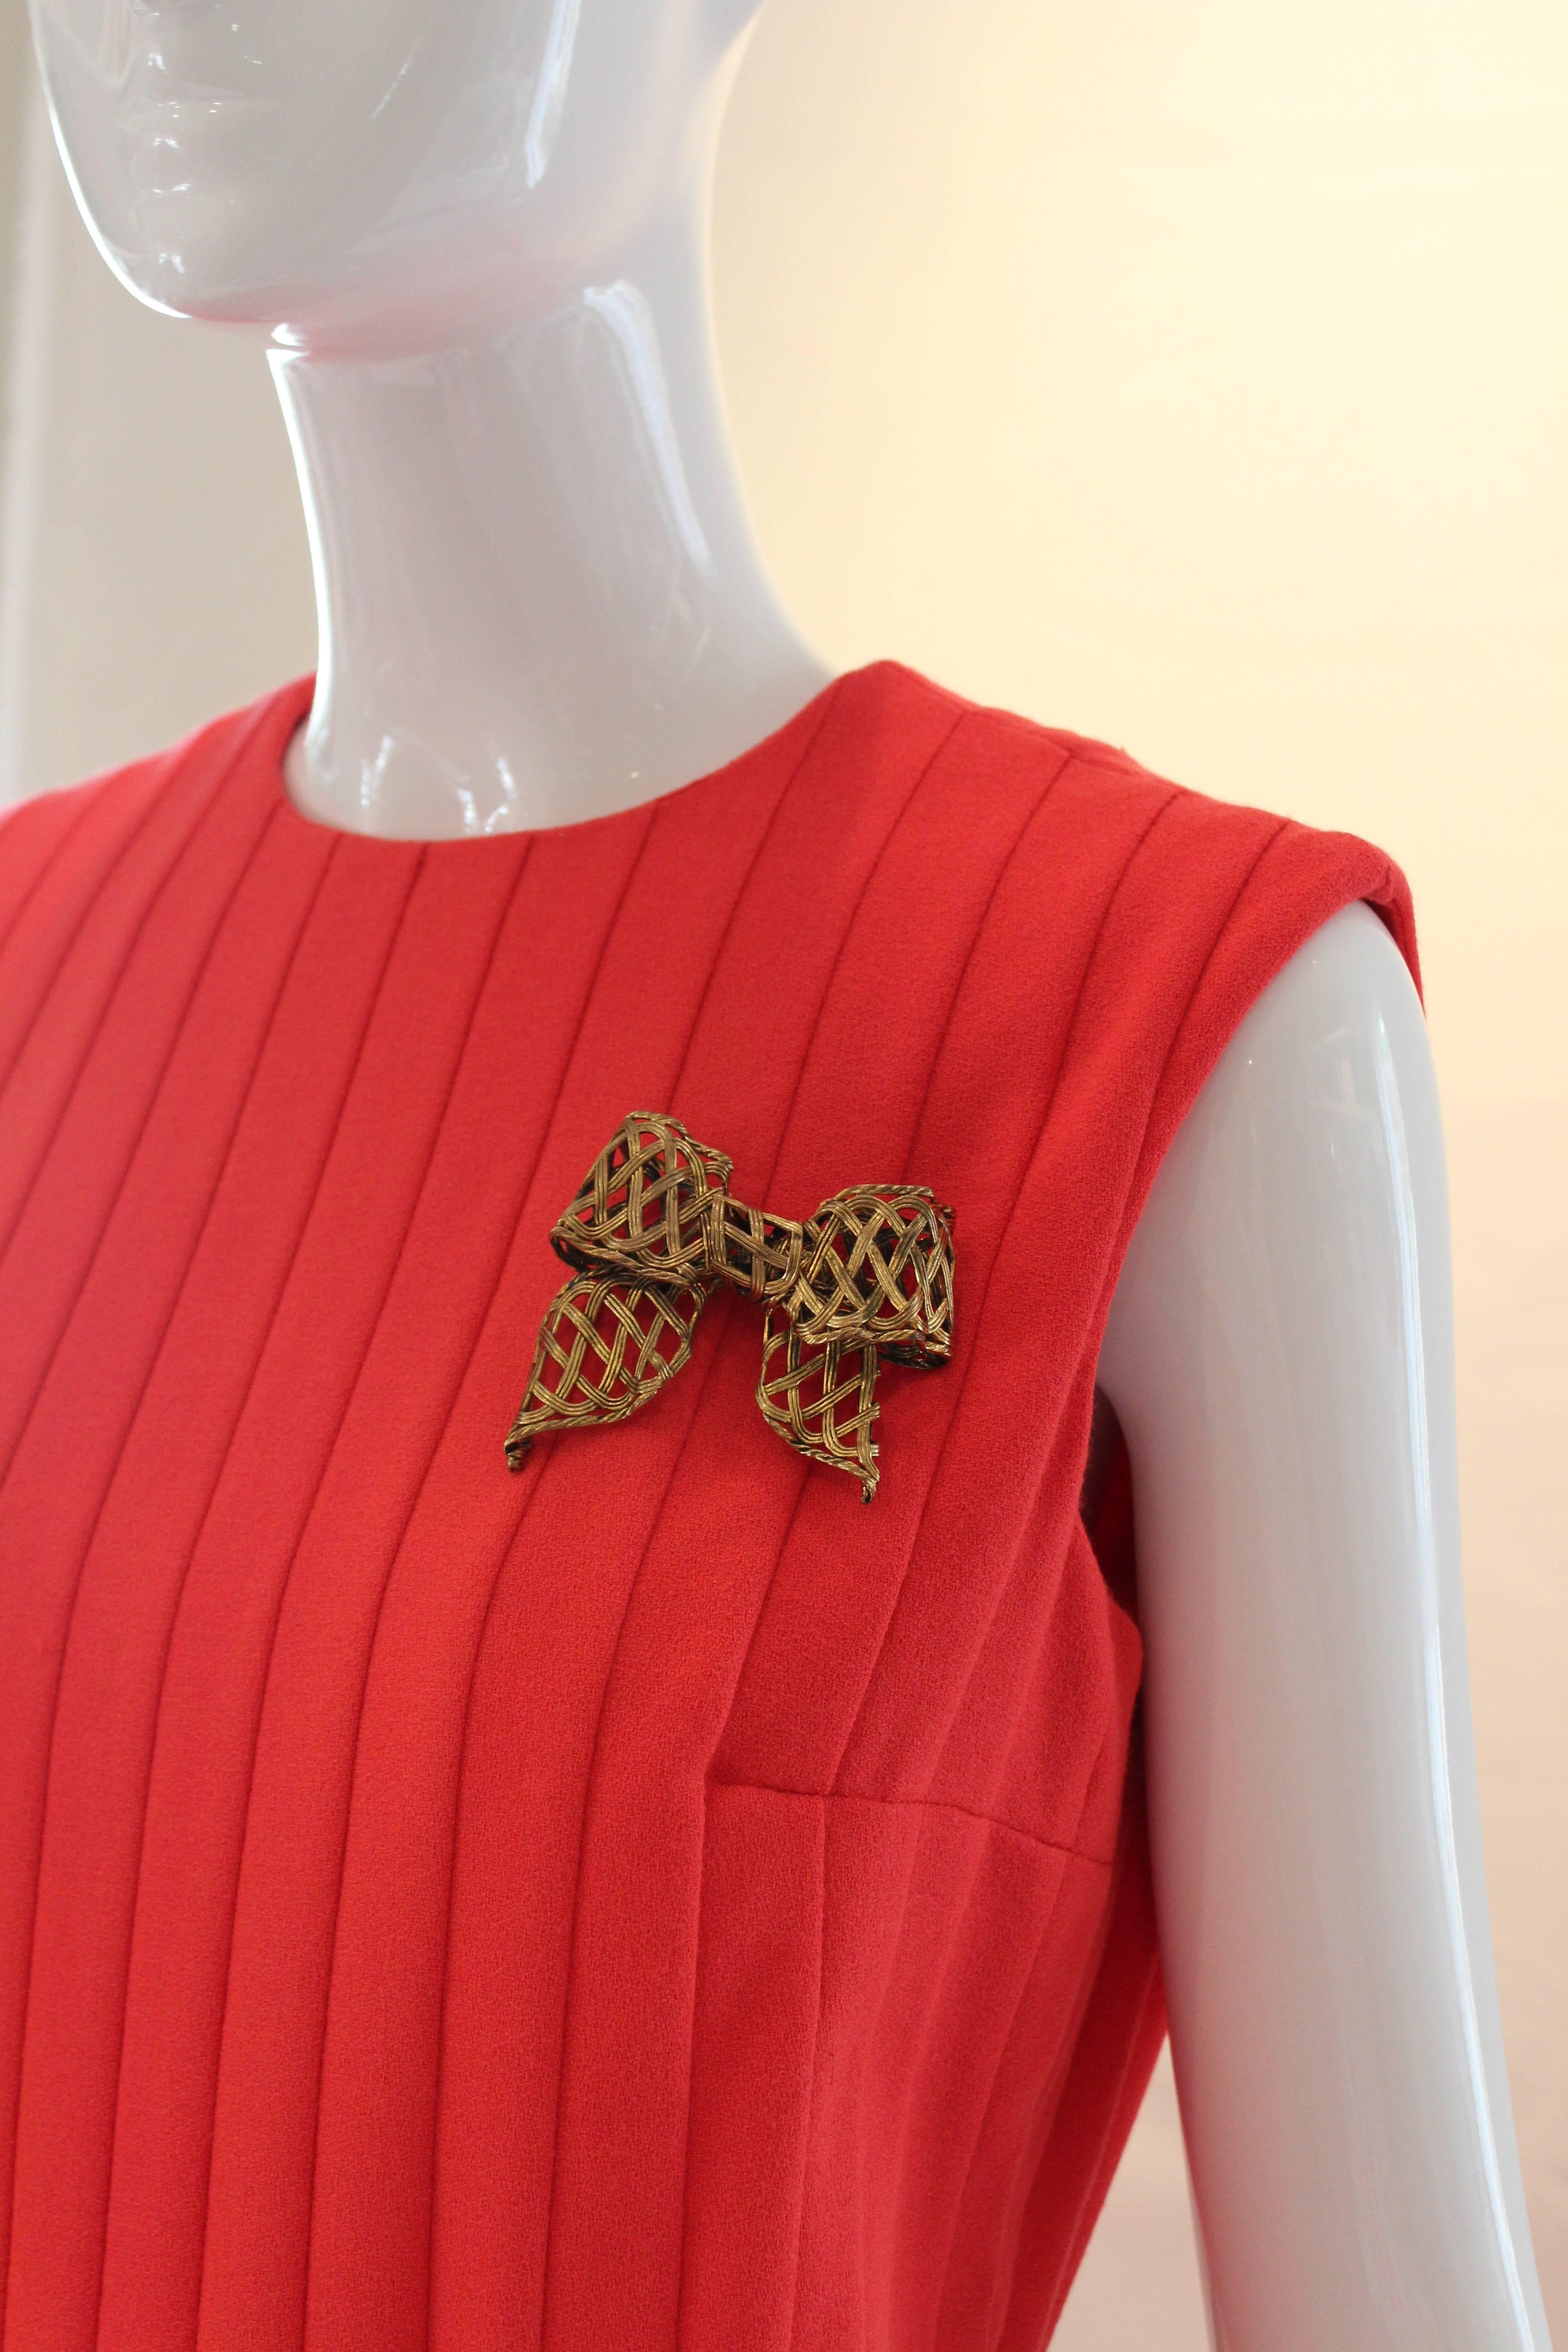 This large bow brooch by Sonia Rykiel is three dimensional and has basket weave texture.  Signed - this piece is simply stunning.

Measurements in inches: 
Hight: .75
Width: 2.75
Length: 2.75